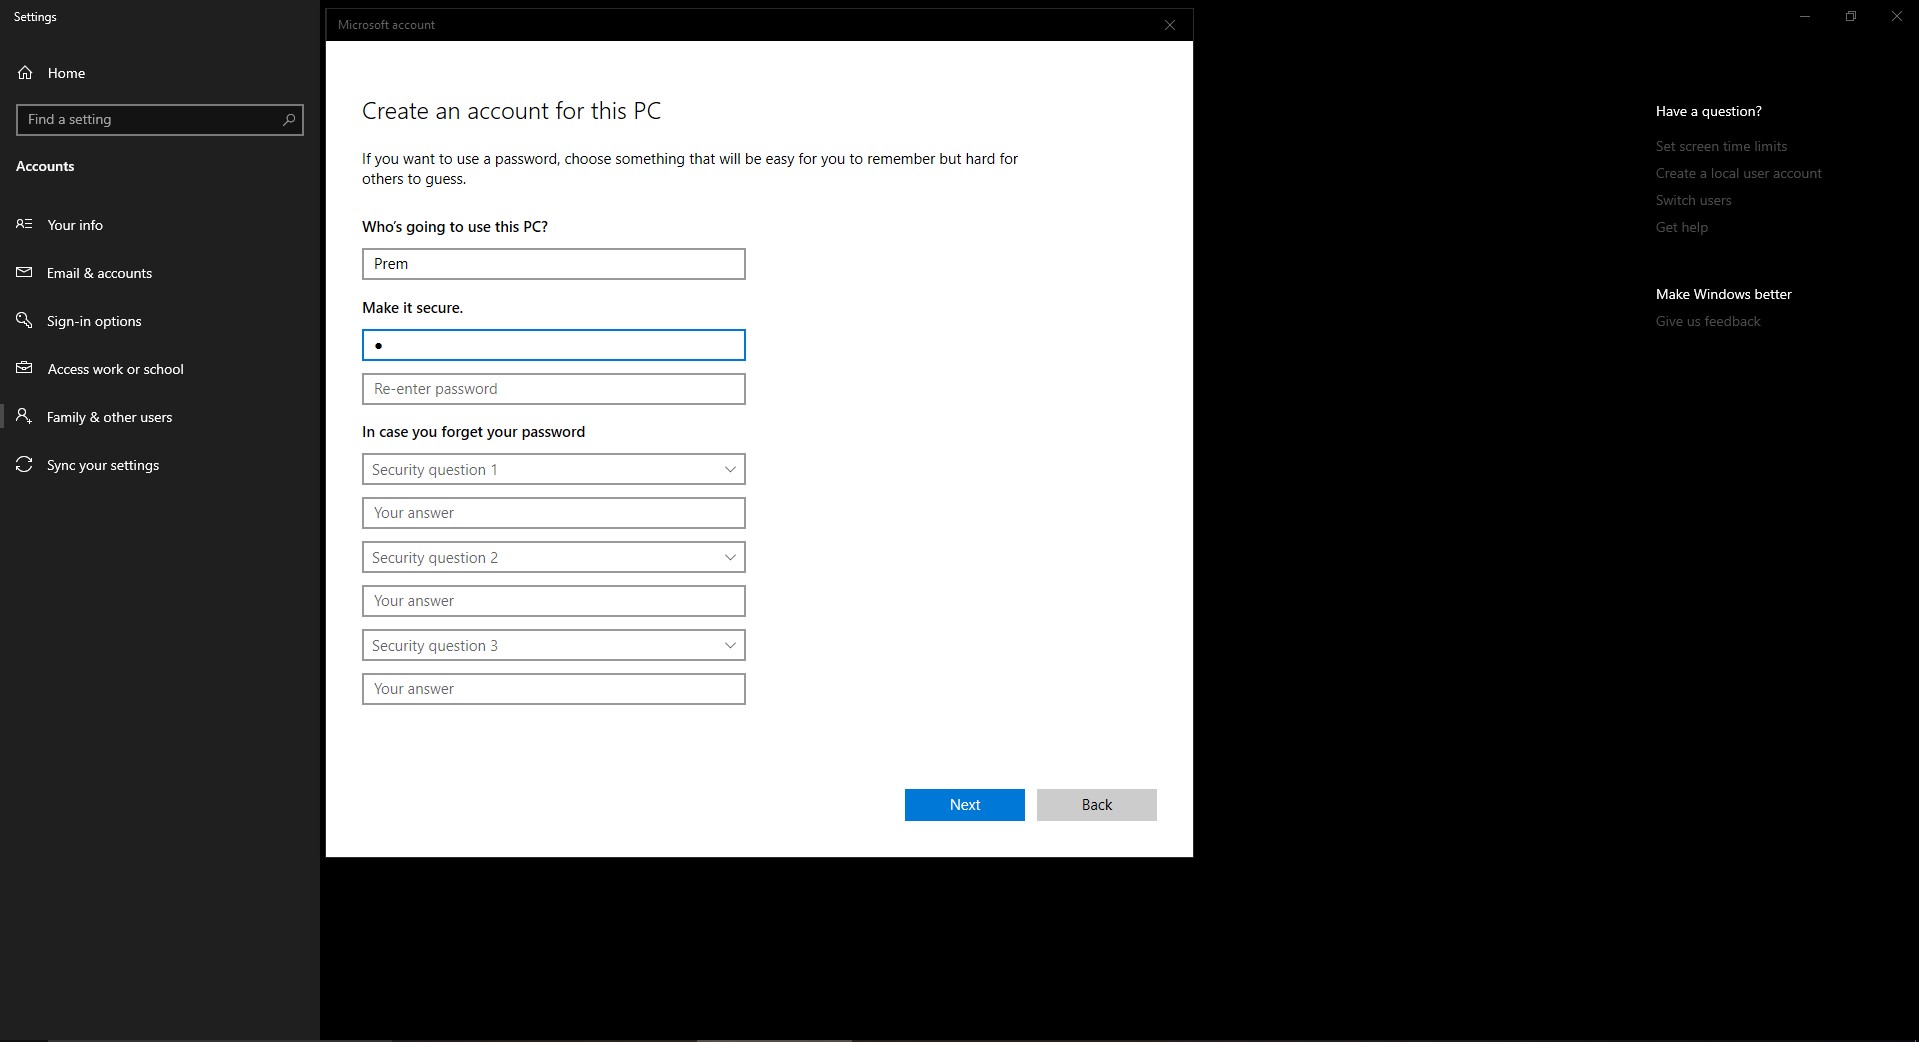 How to Enable/disable security Questions in windows 10?